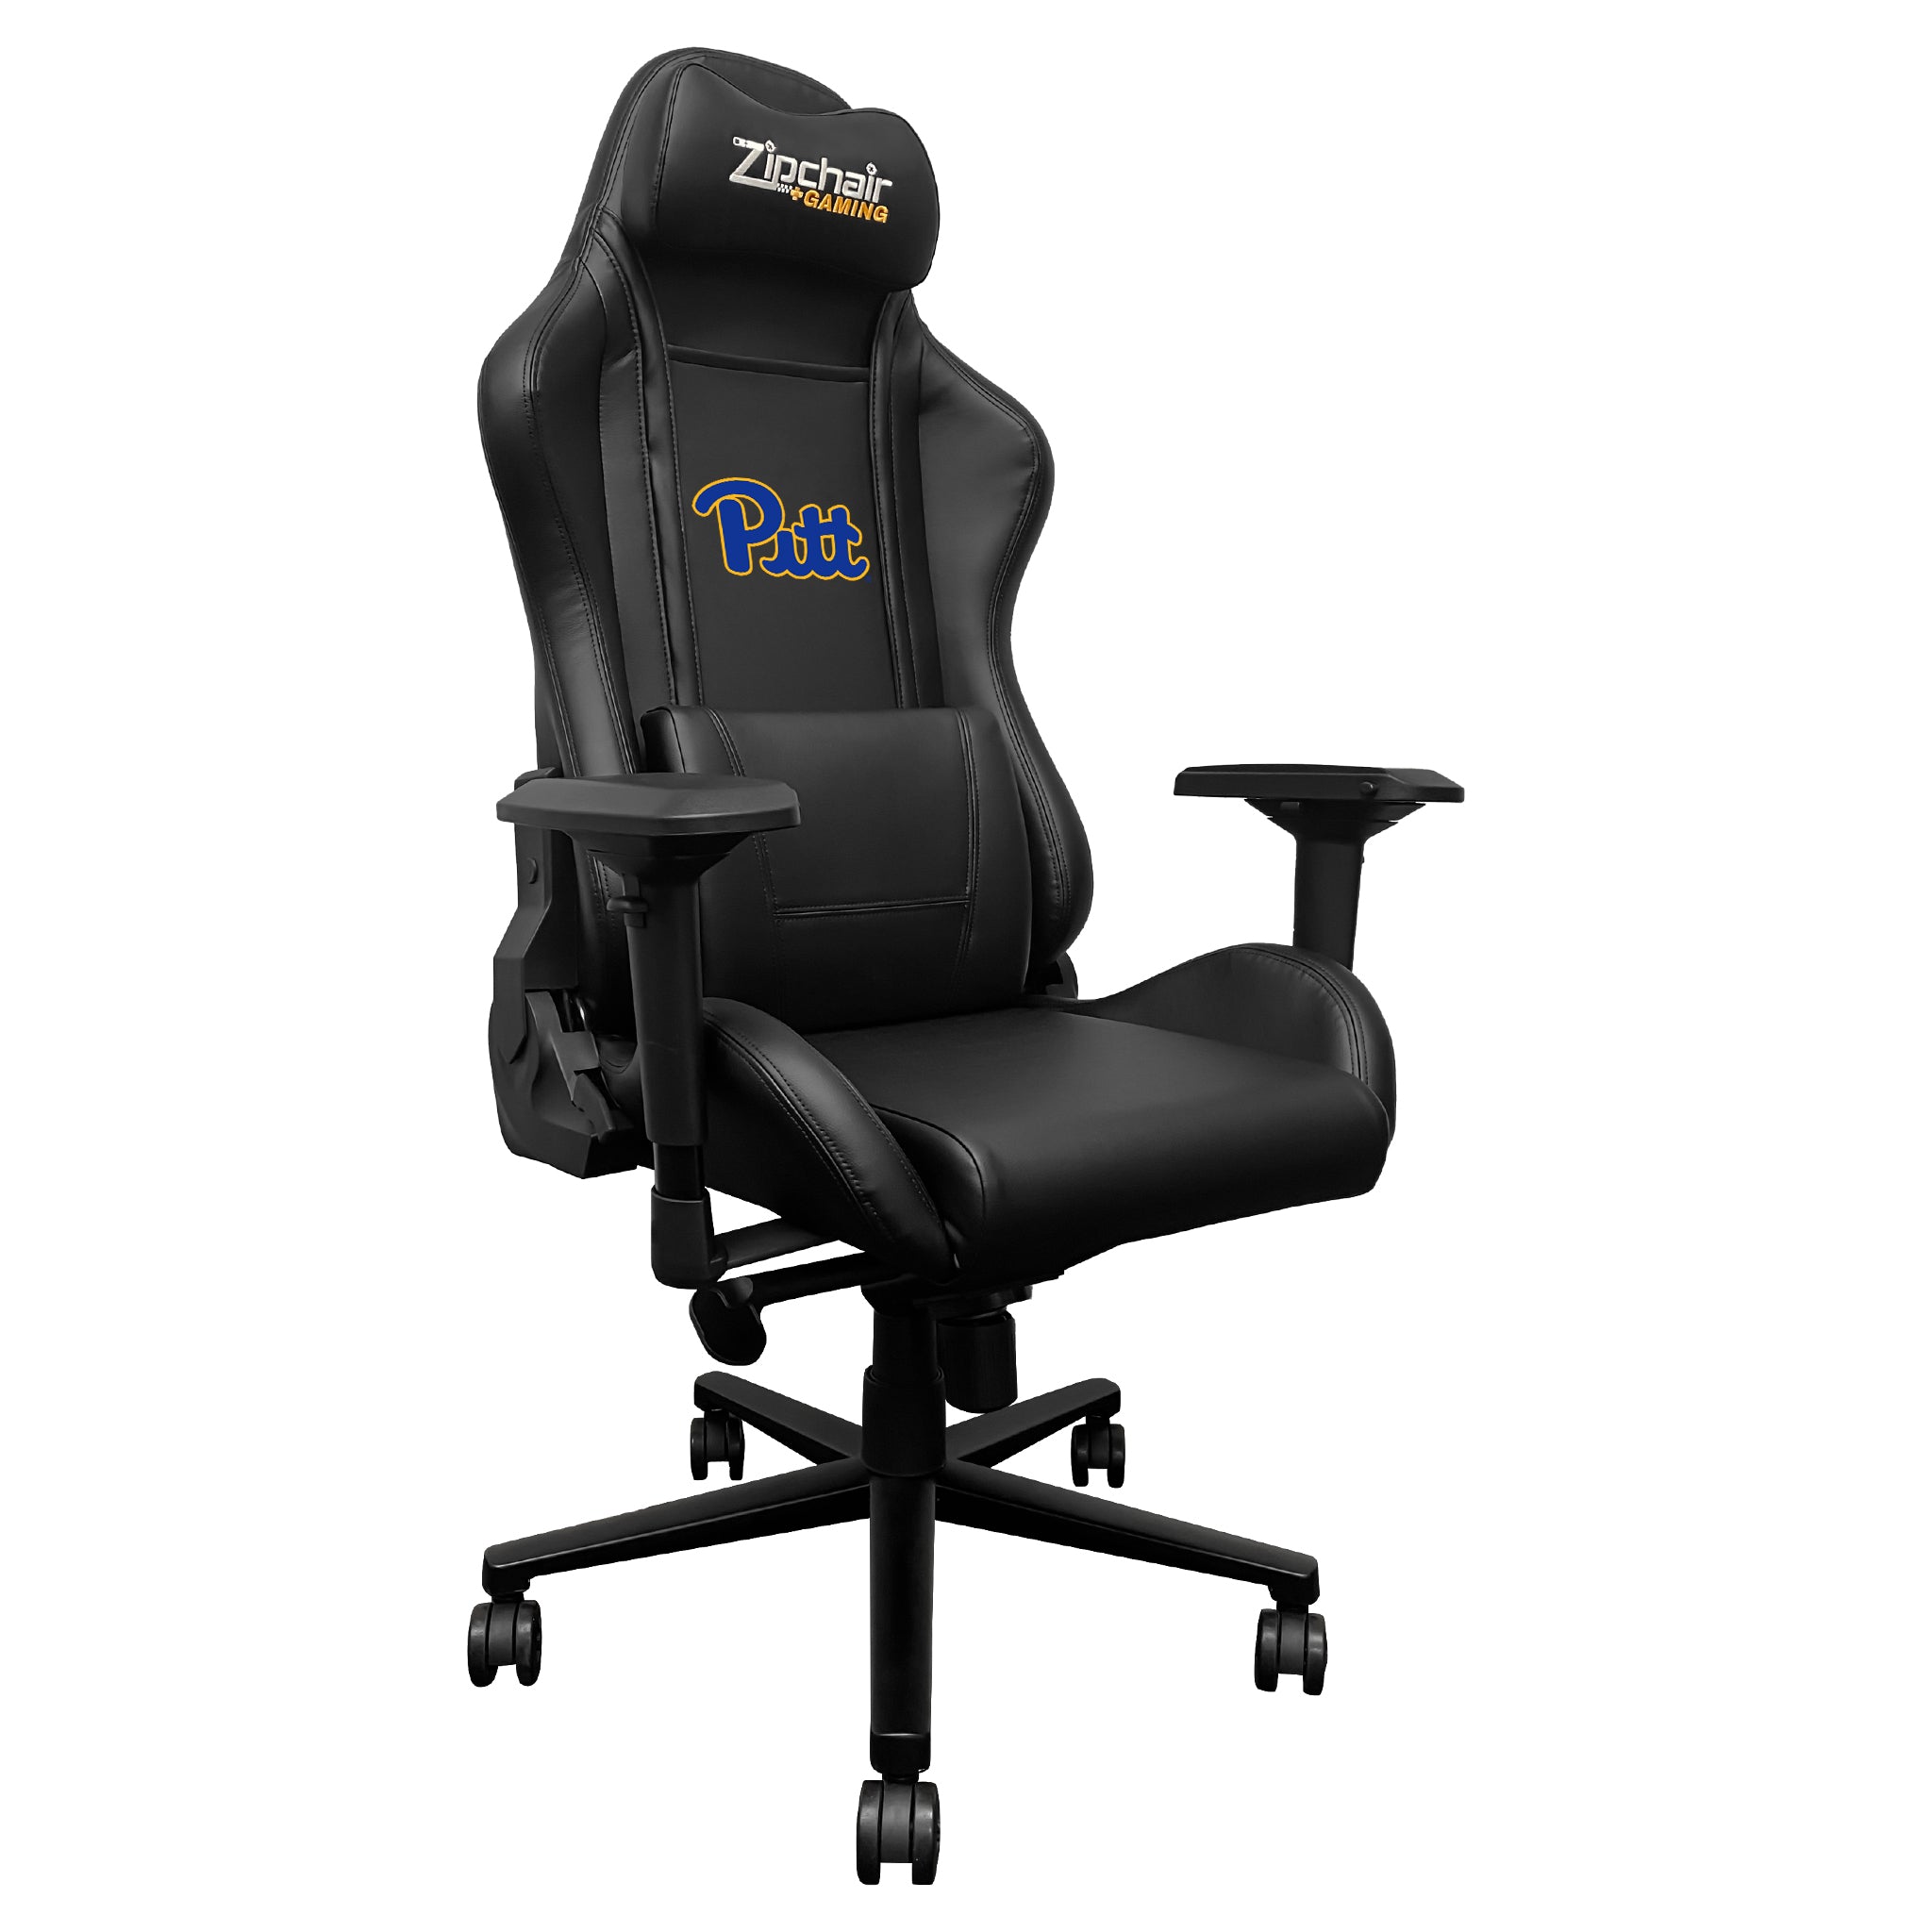 Pittsburgh Panthers Xpression Gaming Chair with Pittsburgh Panthers Logo